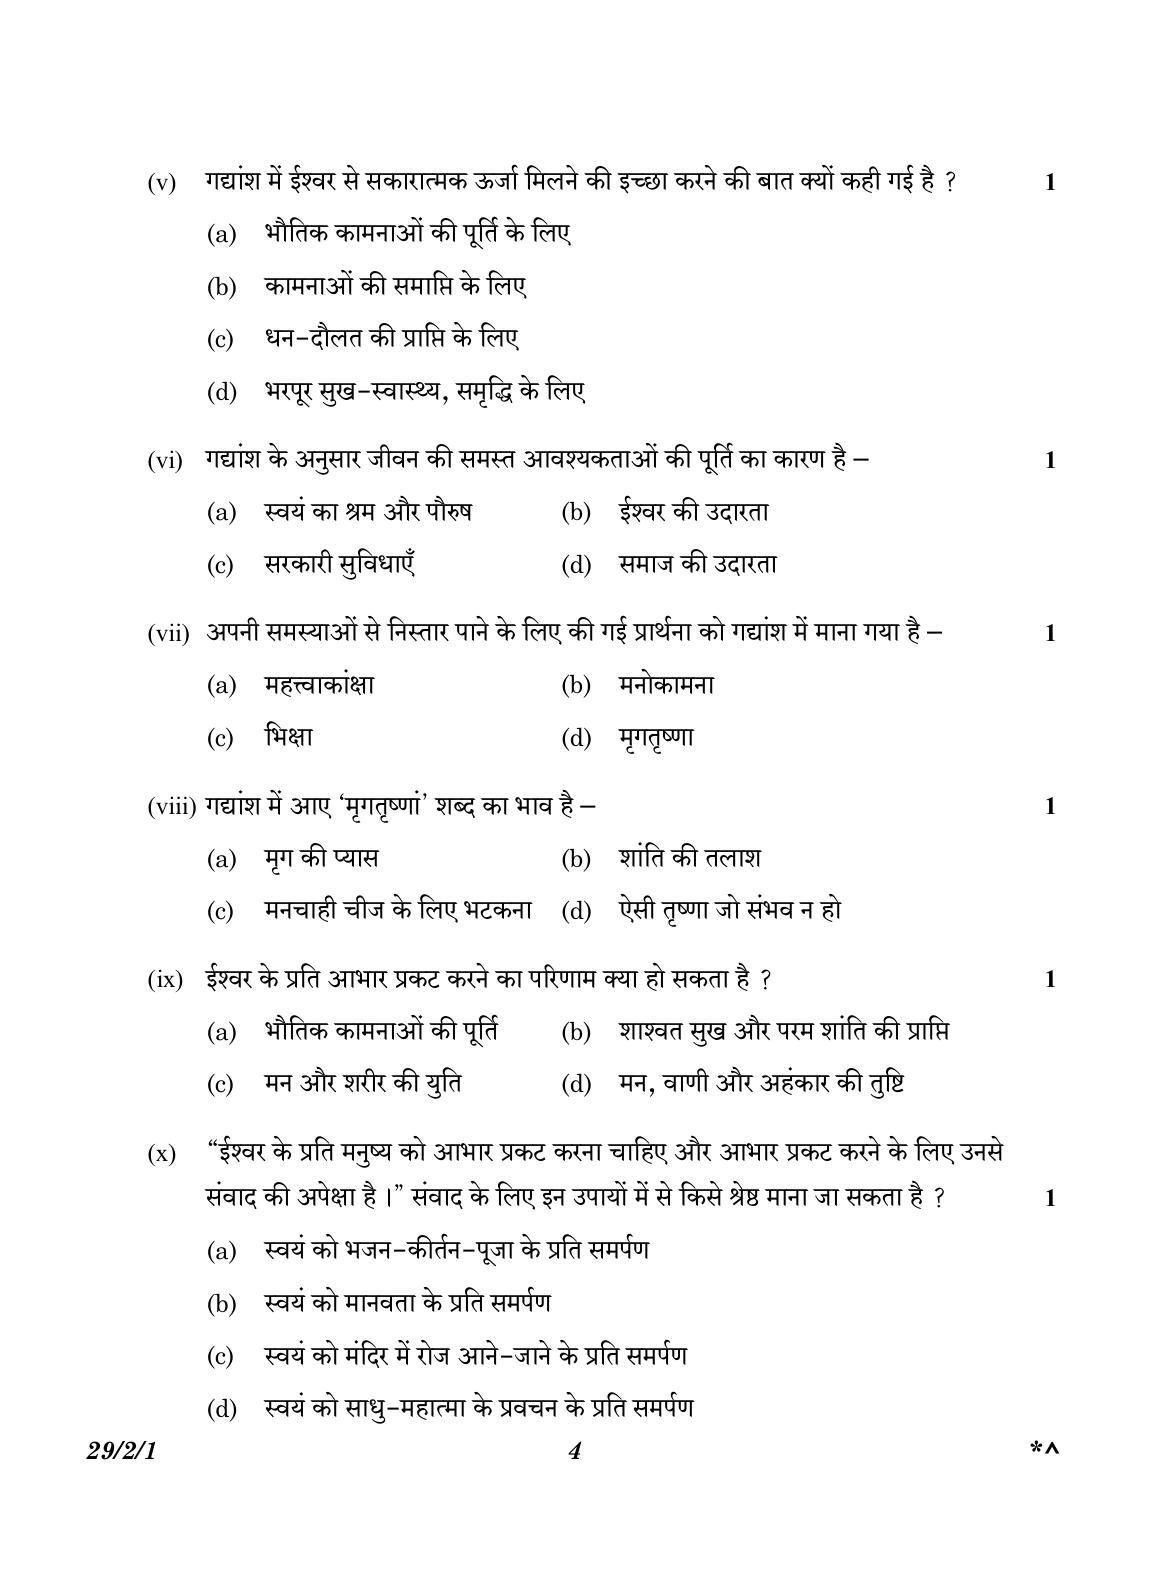 CBSE Class 12 29-2-1 Hindi Elective 2023 Question Paper - Page 4